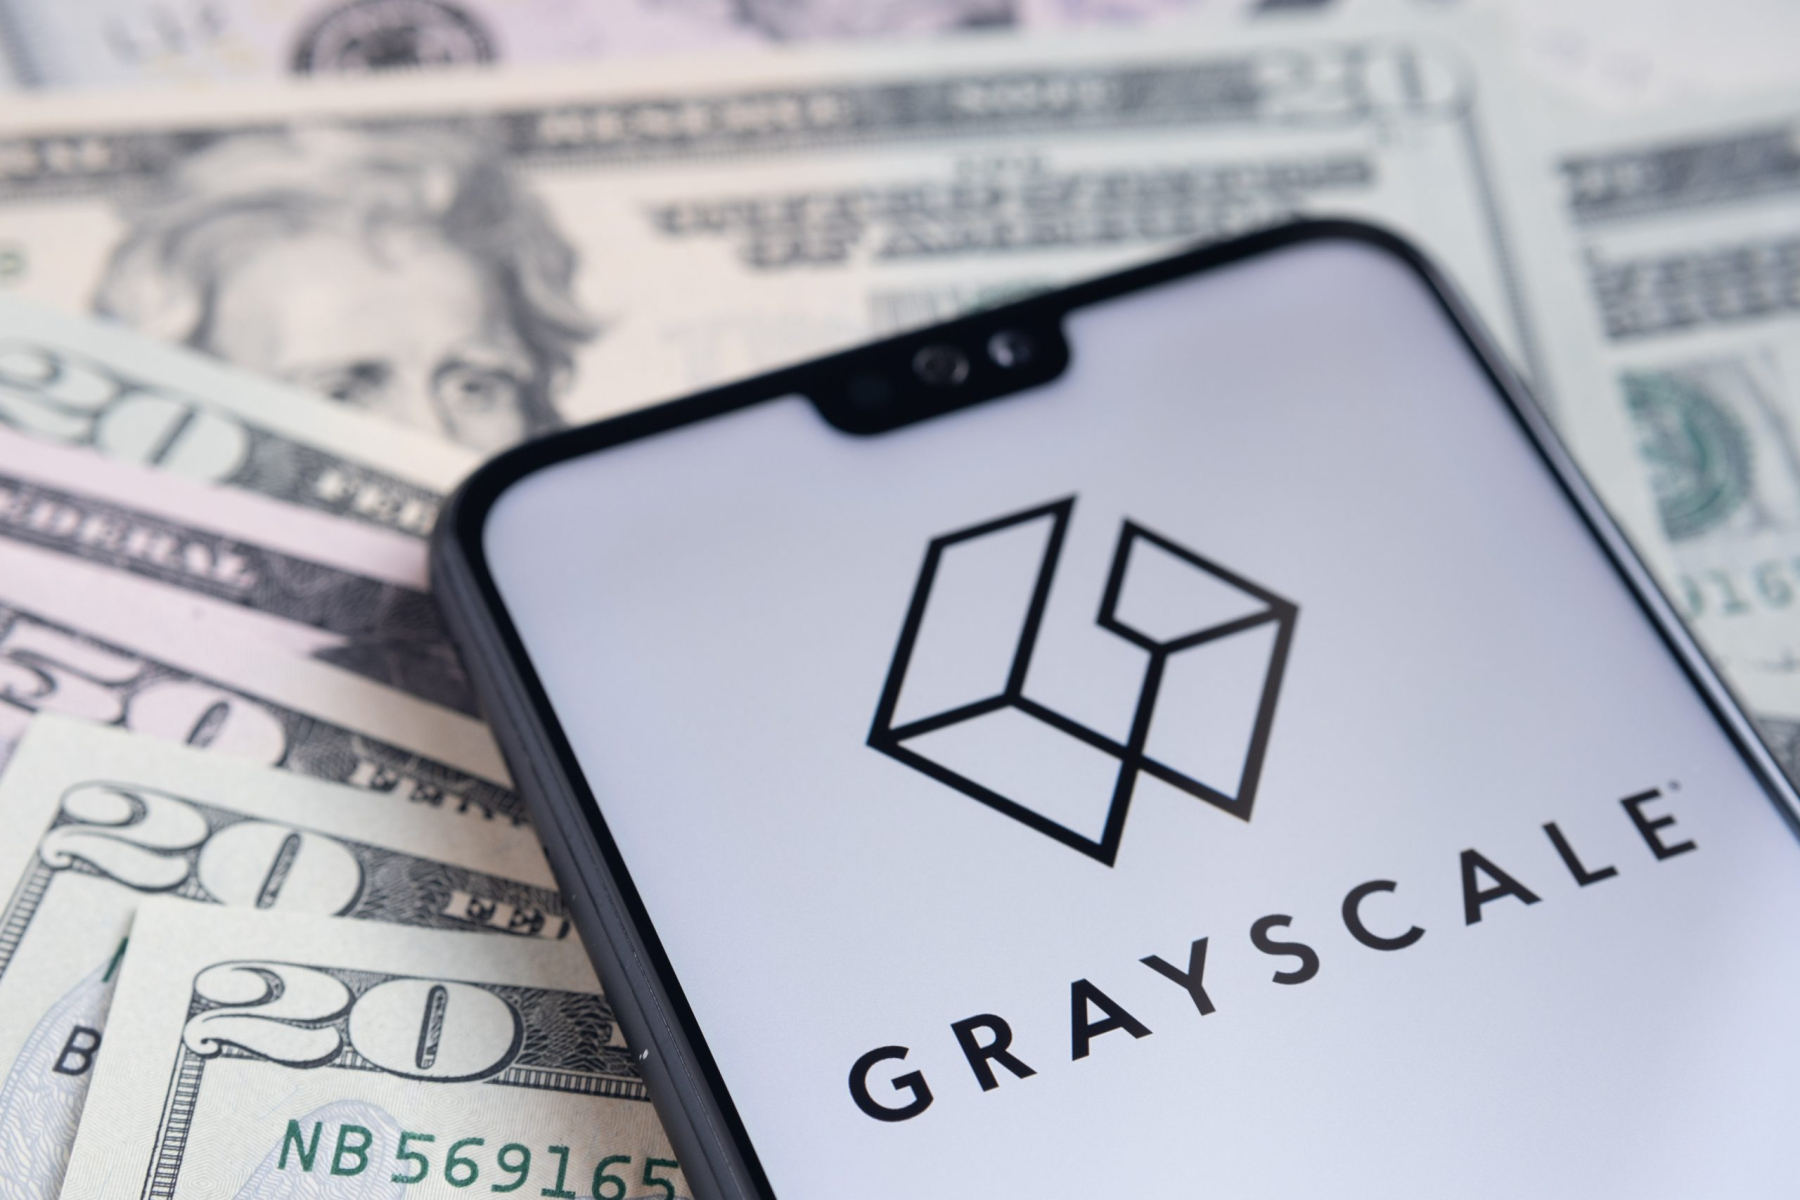 Grayscale refuses to share wallet addresses of their fund containing 635,240 Bitcoin
